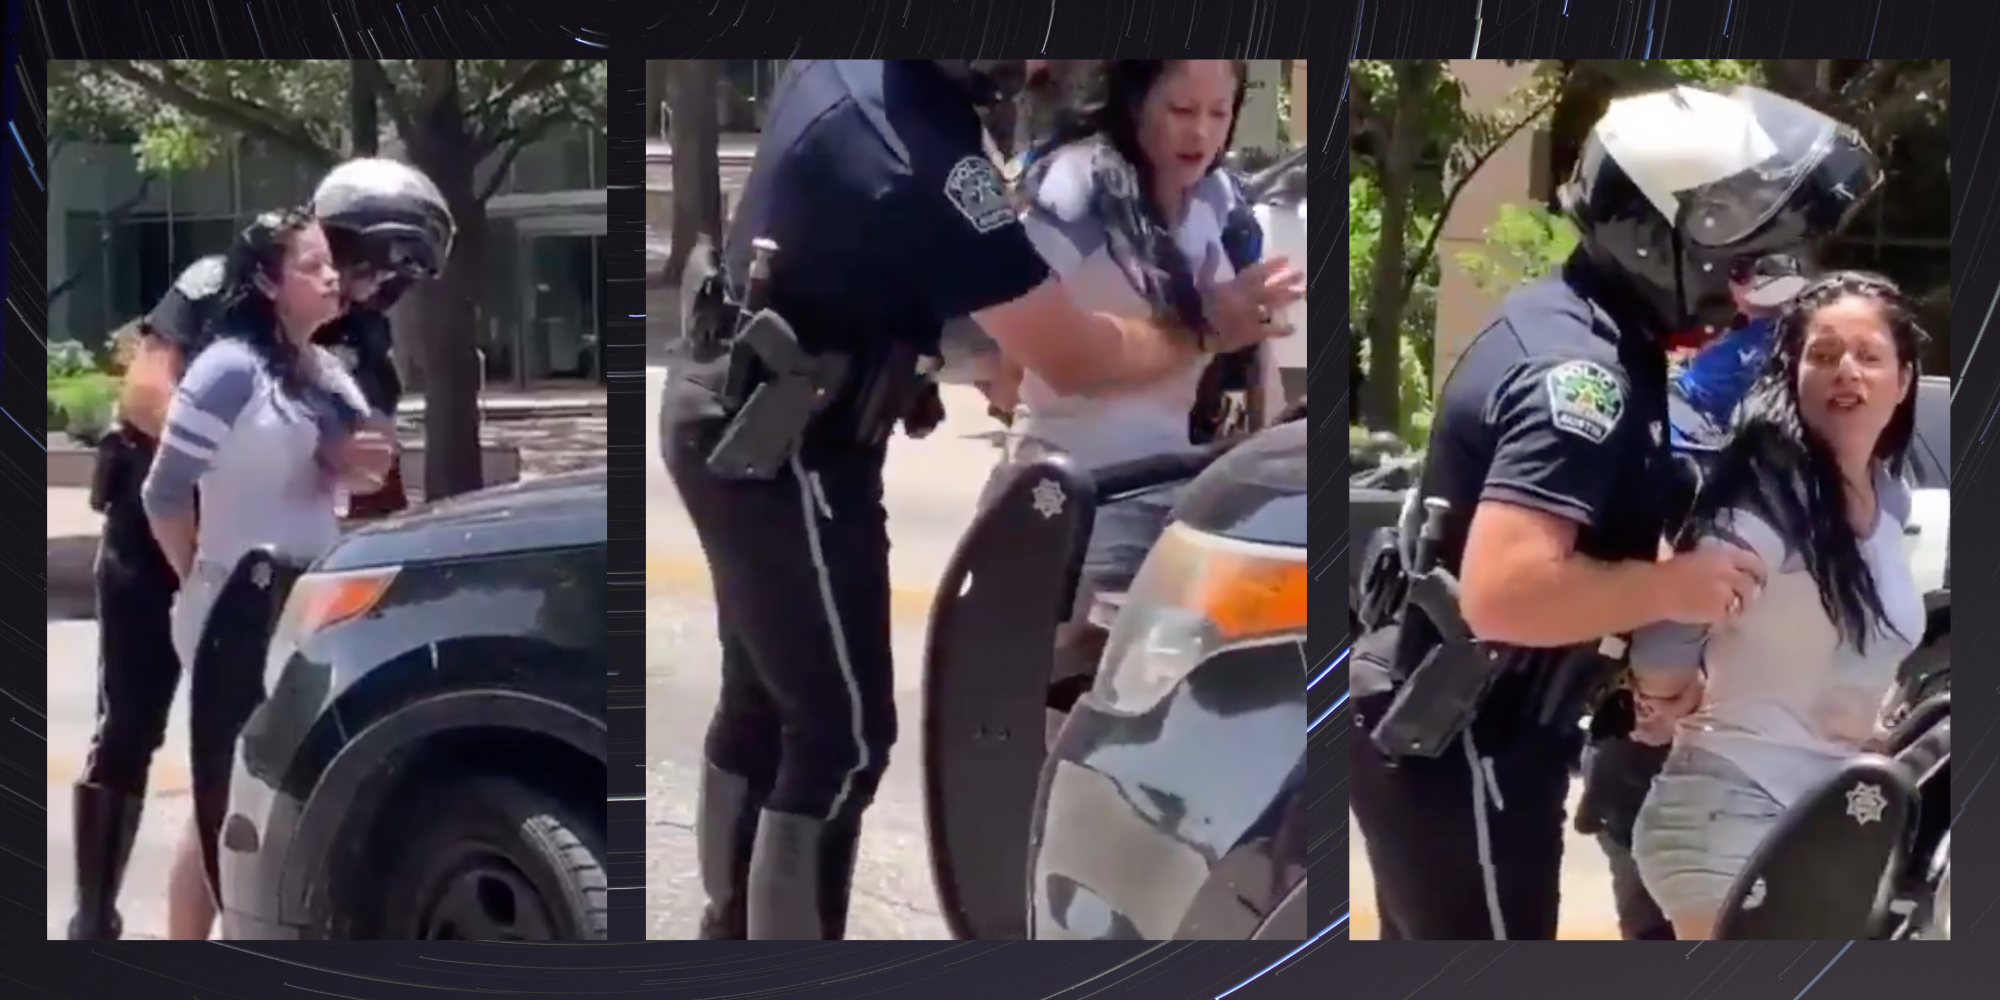 Police Officer Filmed Groping Distressed Woman S Breasts As He Searches Her During Arrest